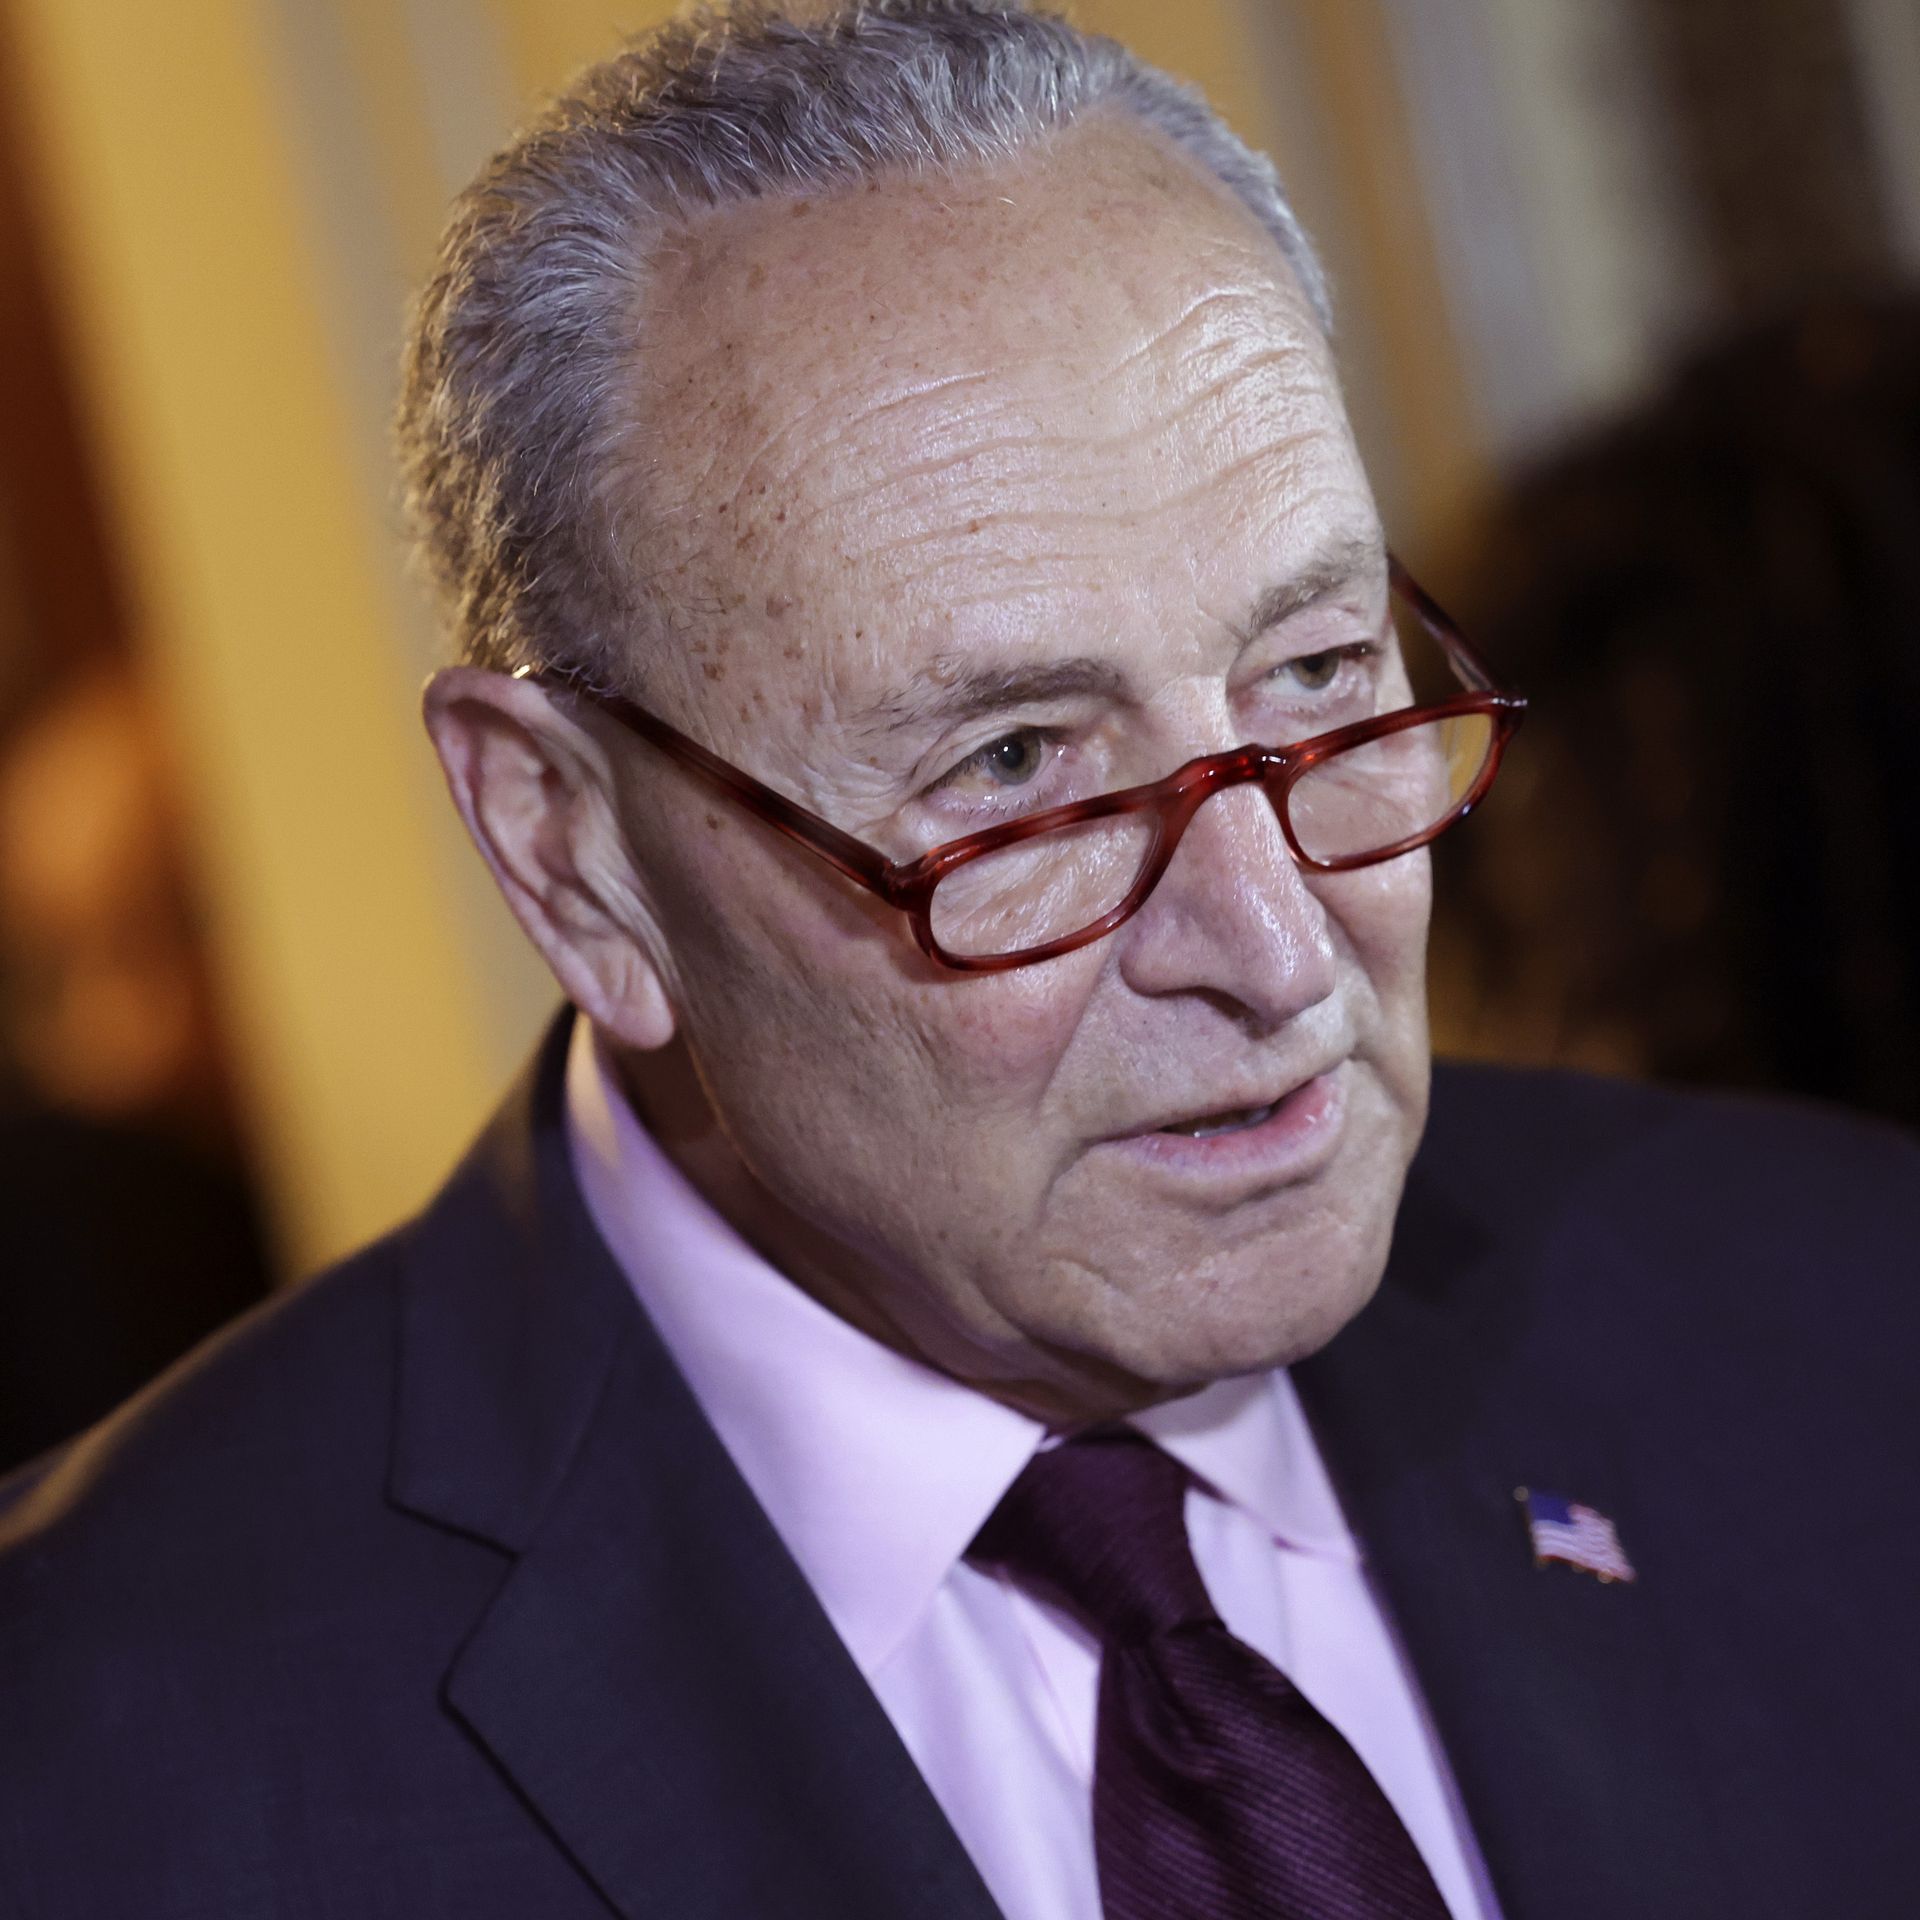 Photo of Chuck Schumer's face